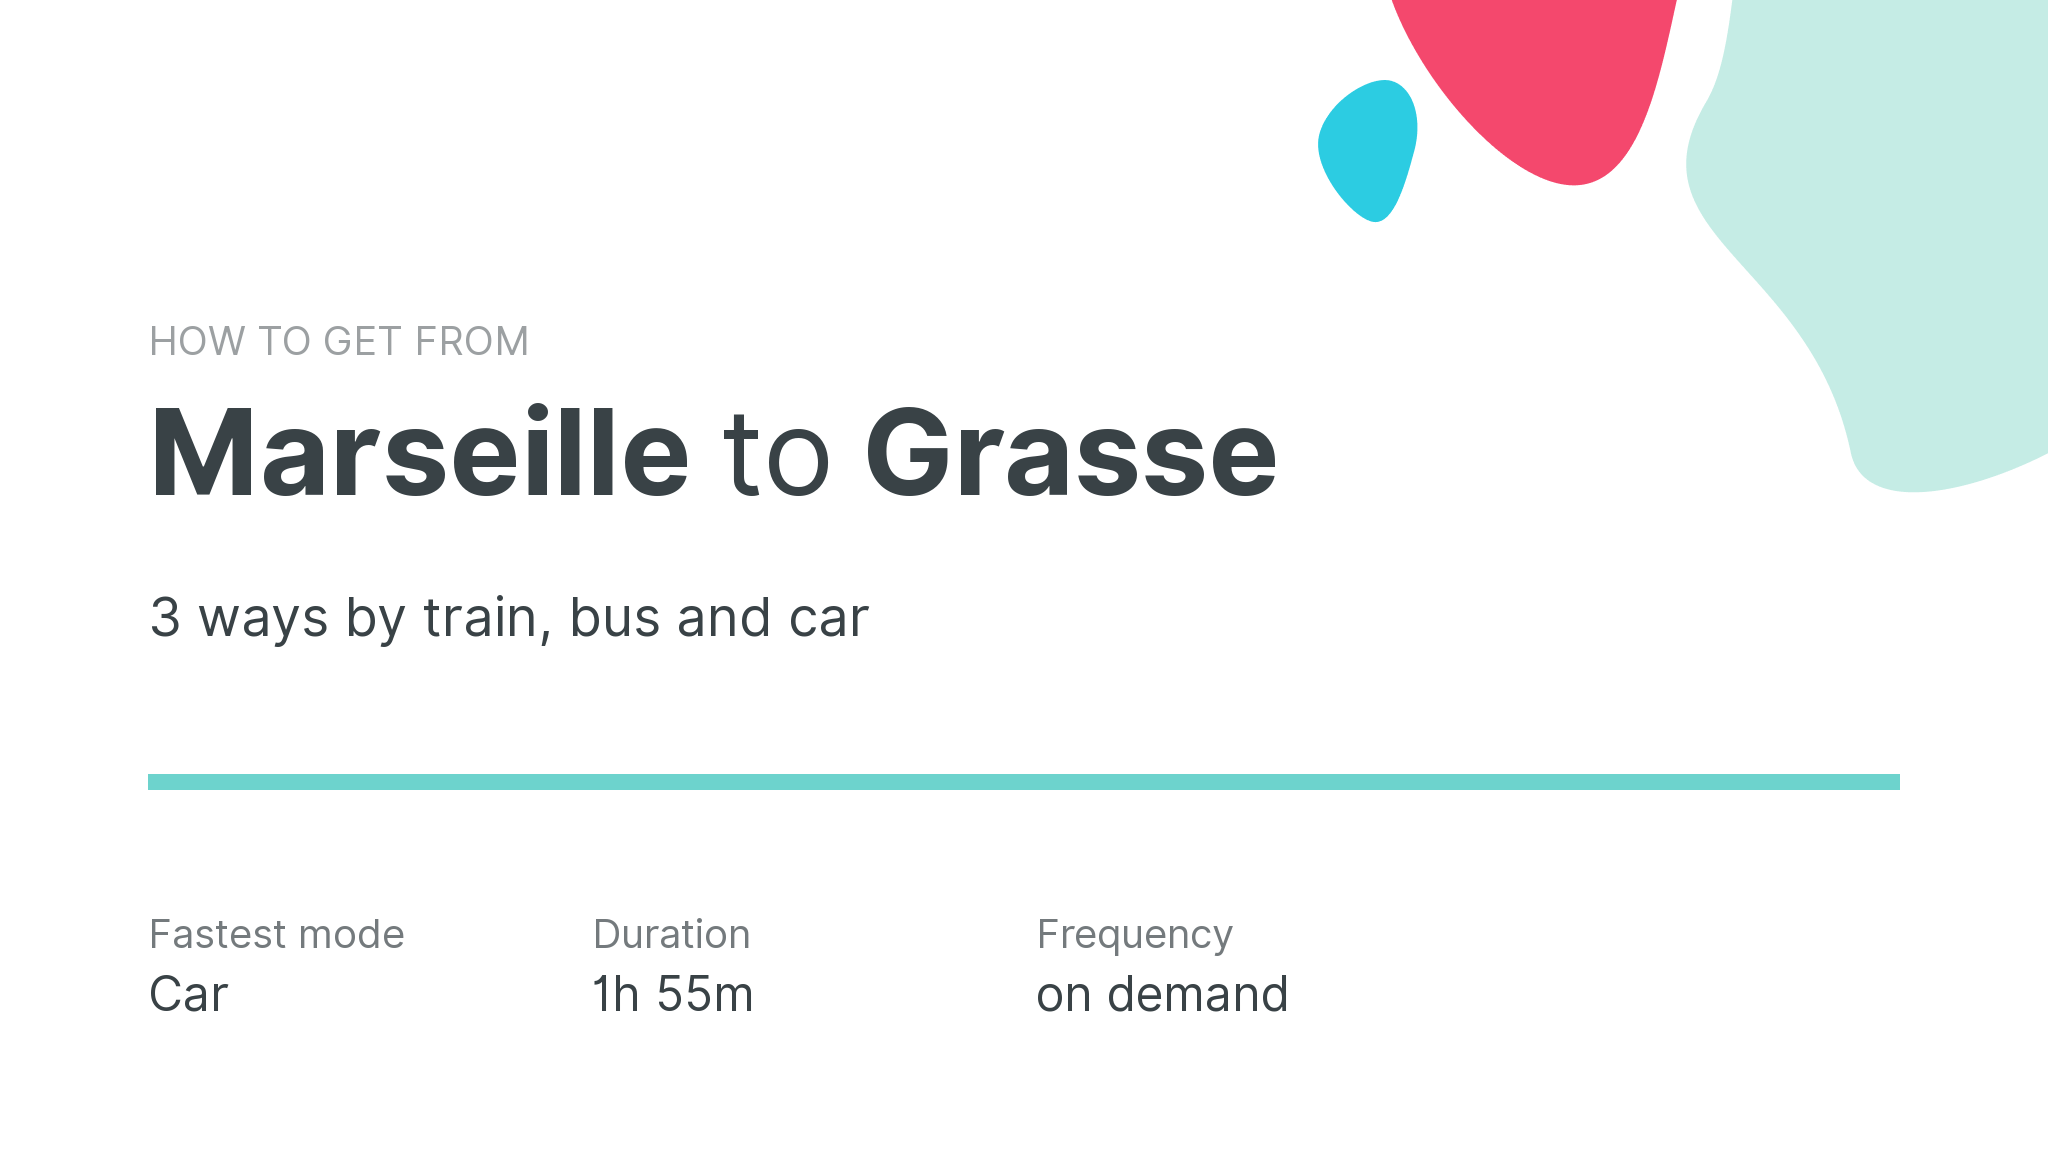 How do I get from Marseille to Grasse